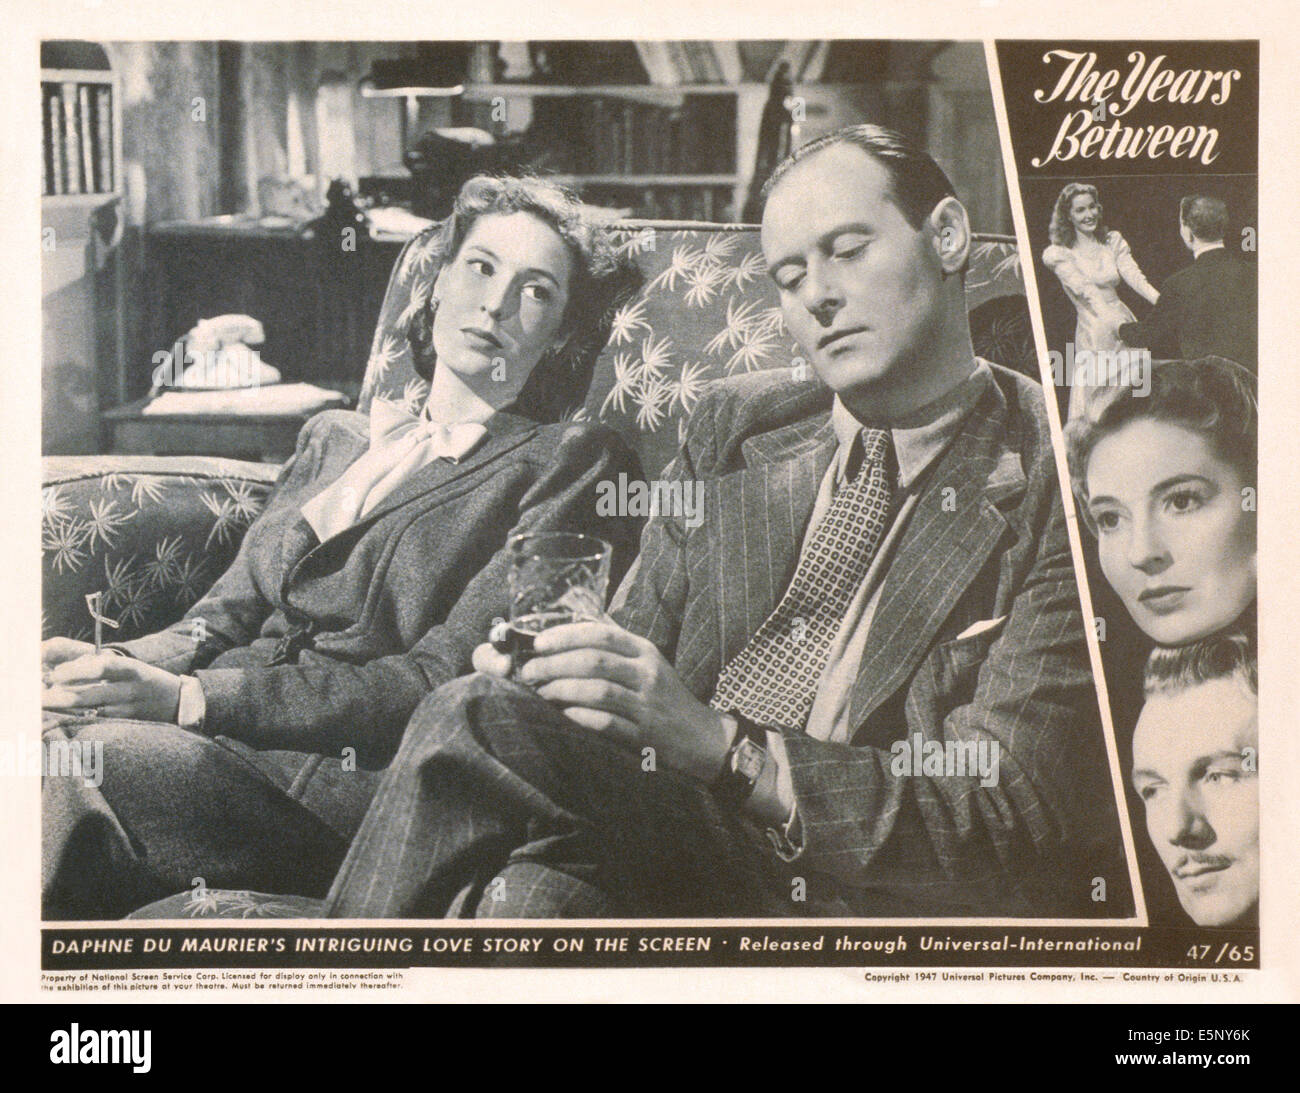 THE YEARS BETWEEN, US lobbycard, from left, Valerie Hobson, James McKechnie; bottom right: Michael Redgrave, 1946 Stock Photo